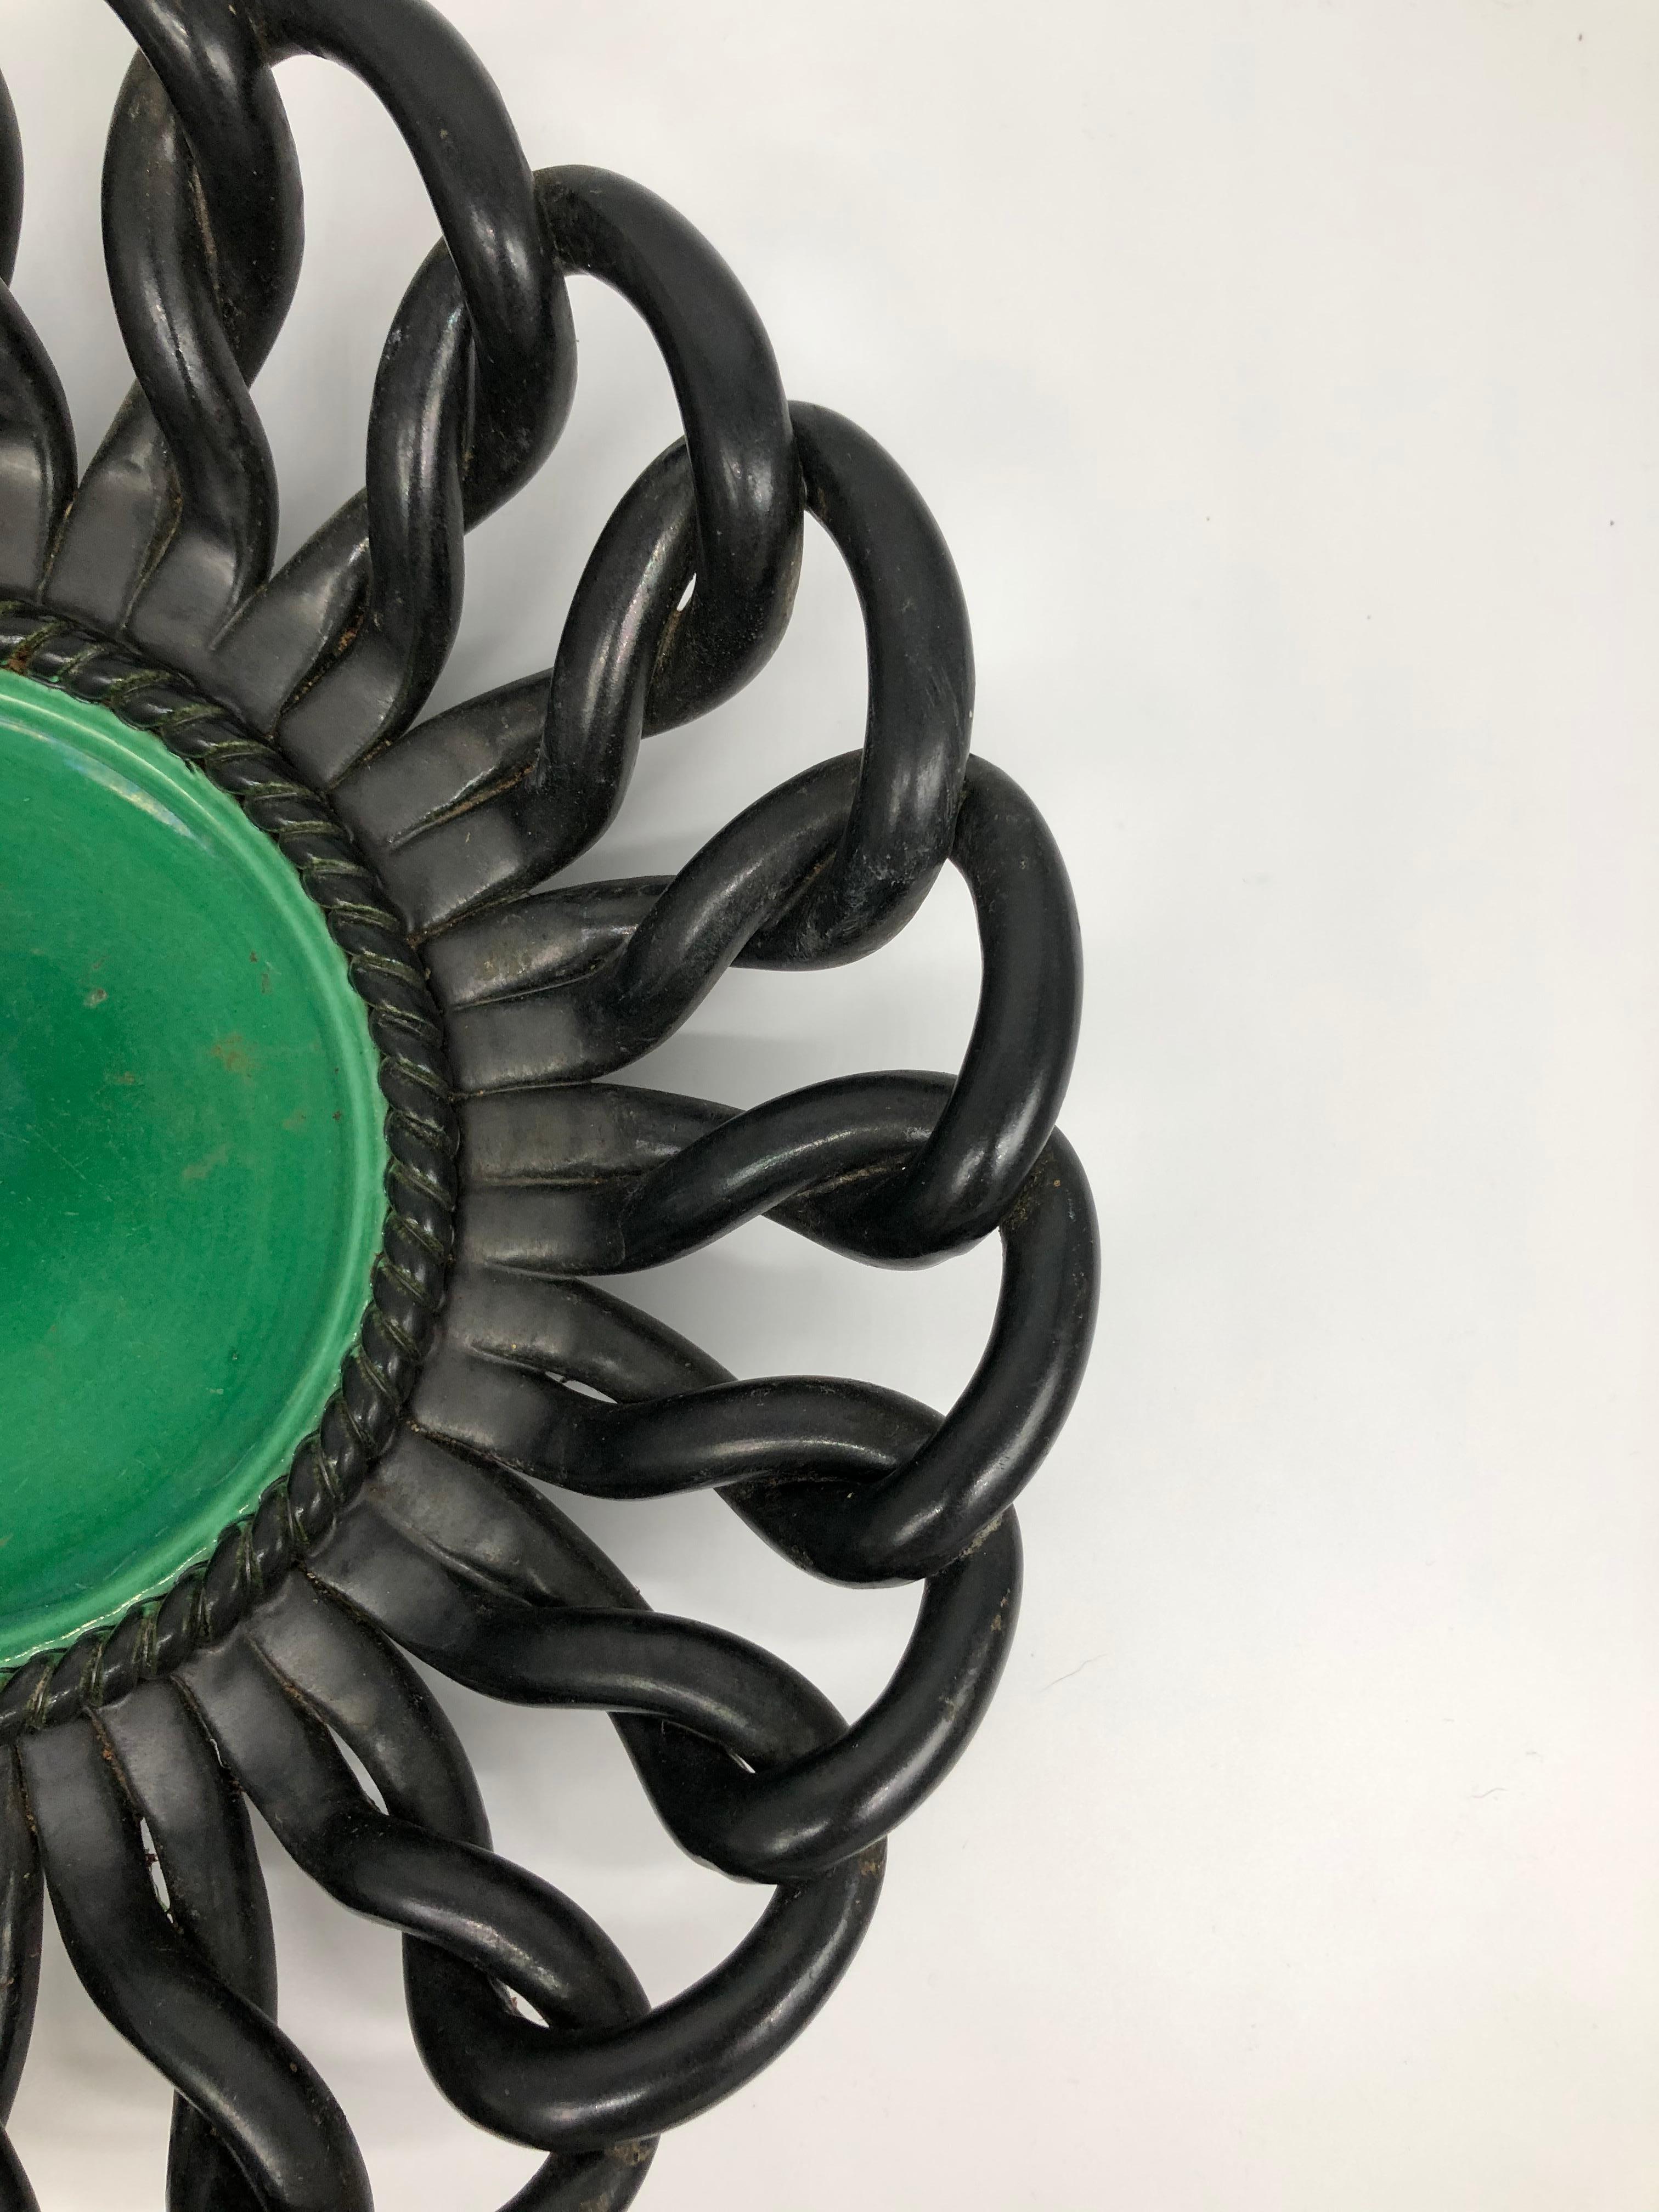 Large dish, green and black enameled ceramic, decorated with interlaced rim, French, 1950s.